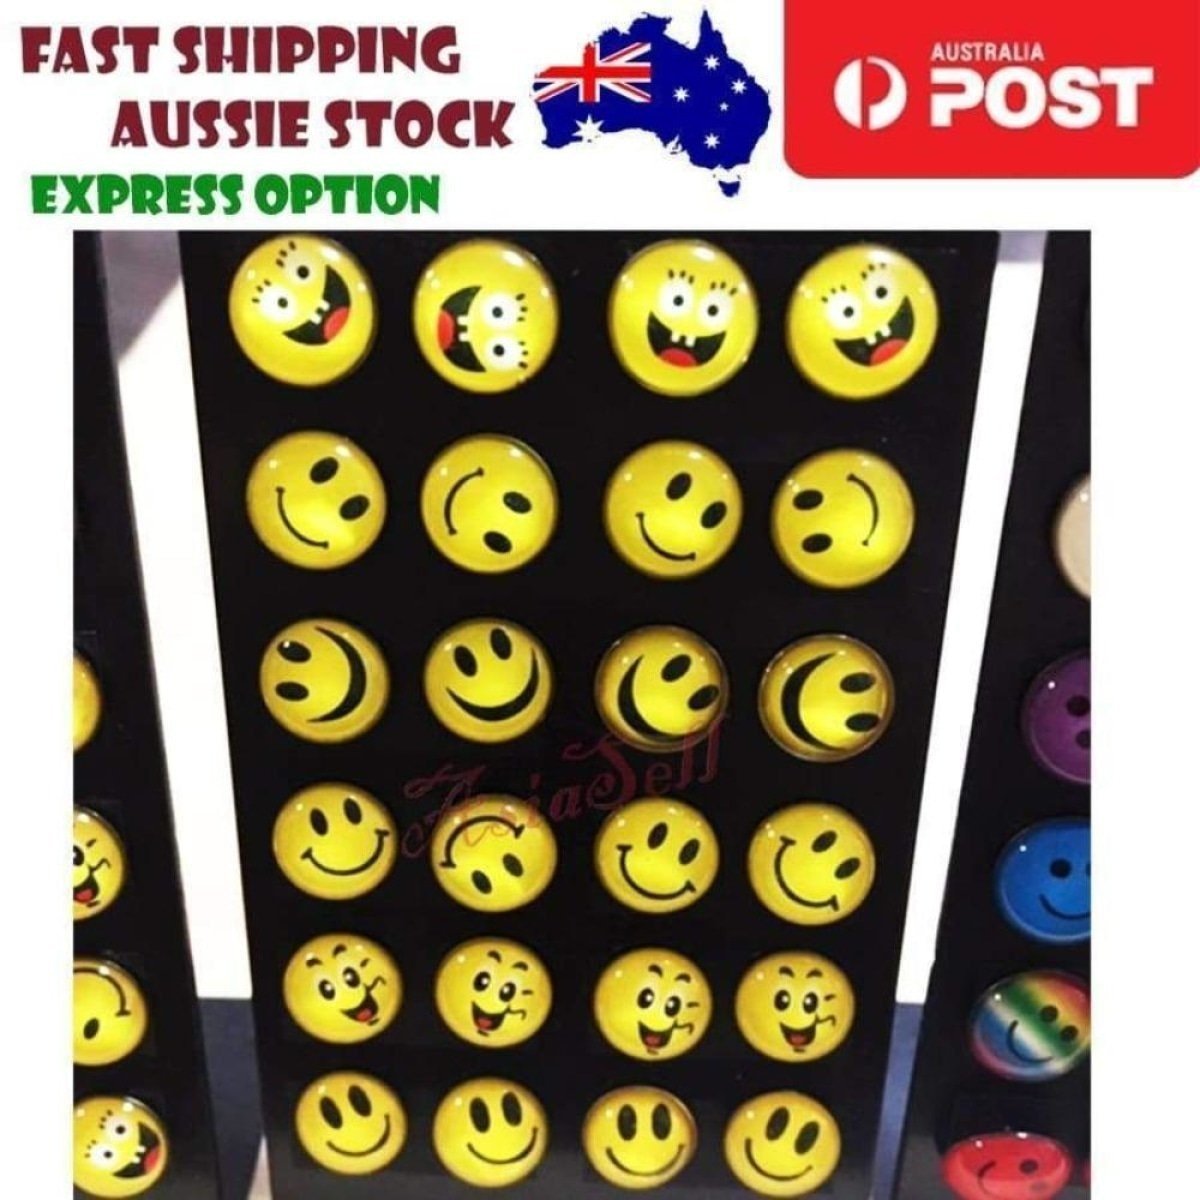 12 Pairs Cute Emoticon Smiley Face Furry Stud Earring Girls Fur Ball Earrings - Smiley 1 - - Asia Sell